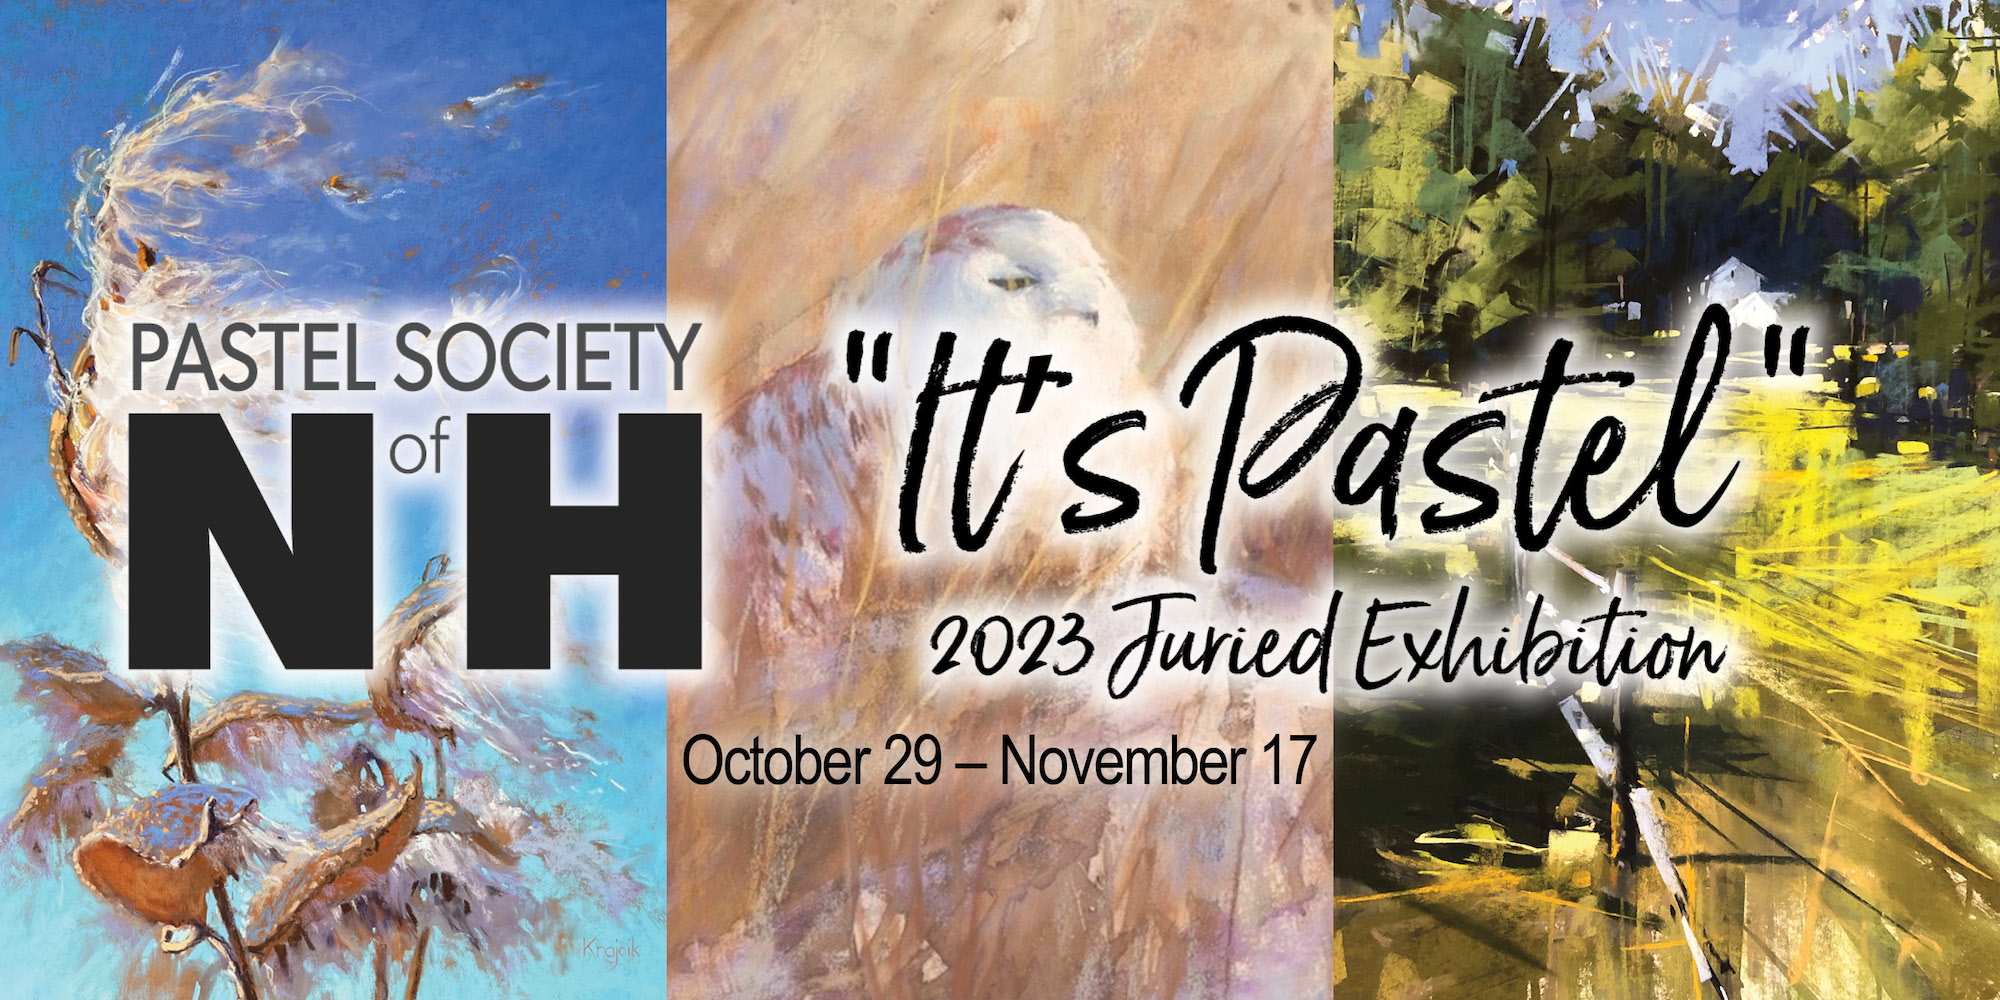 NH Pastel Society "It's Pastel" 2023 Juried Exhibition on display OCt 29 – Nov 17. Background has three pastel artworks. A blue sky with a cotton plant blowing in the wind, a white snowy owl nested in a field of dried grasses, and a white barn off in the distance beyond a large green field.